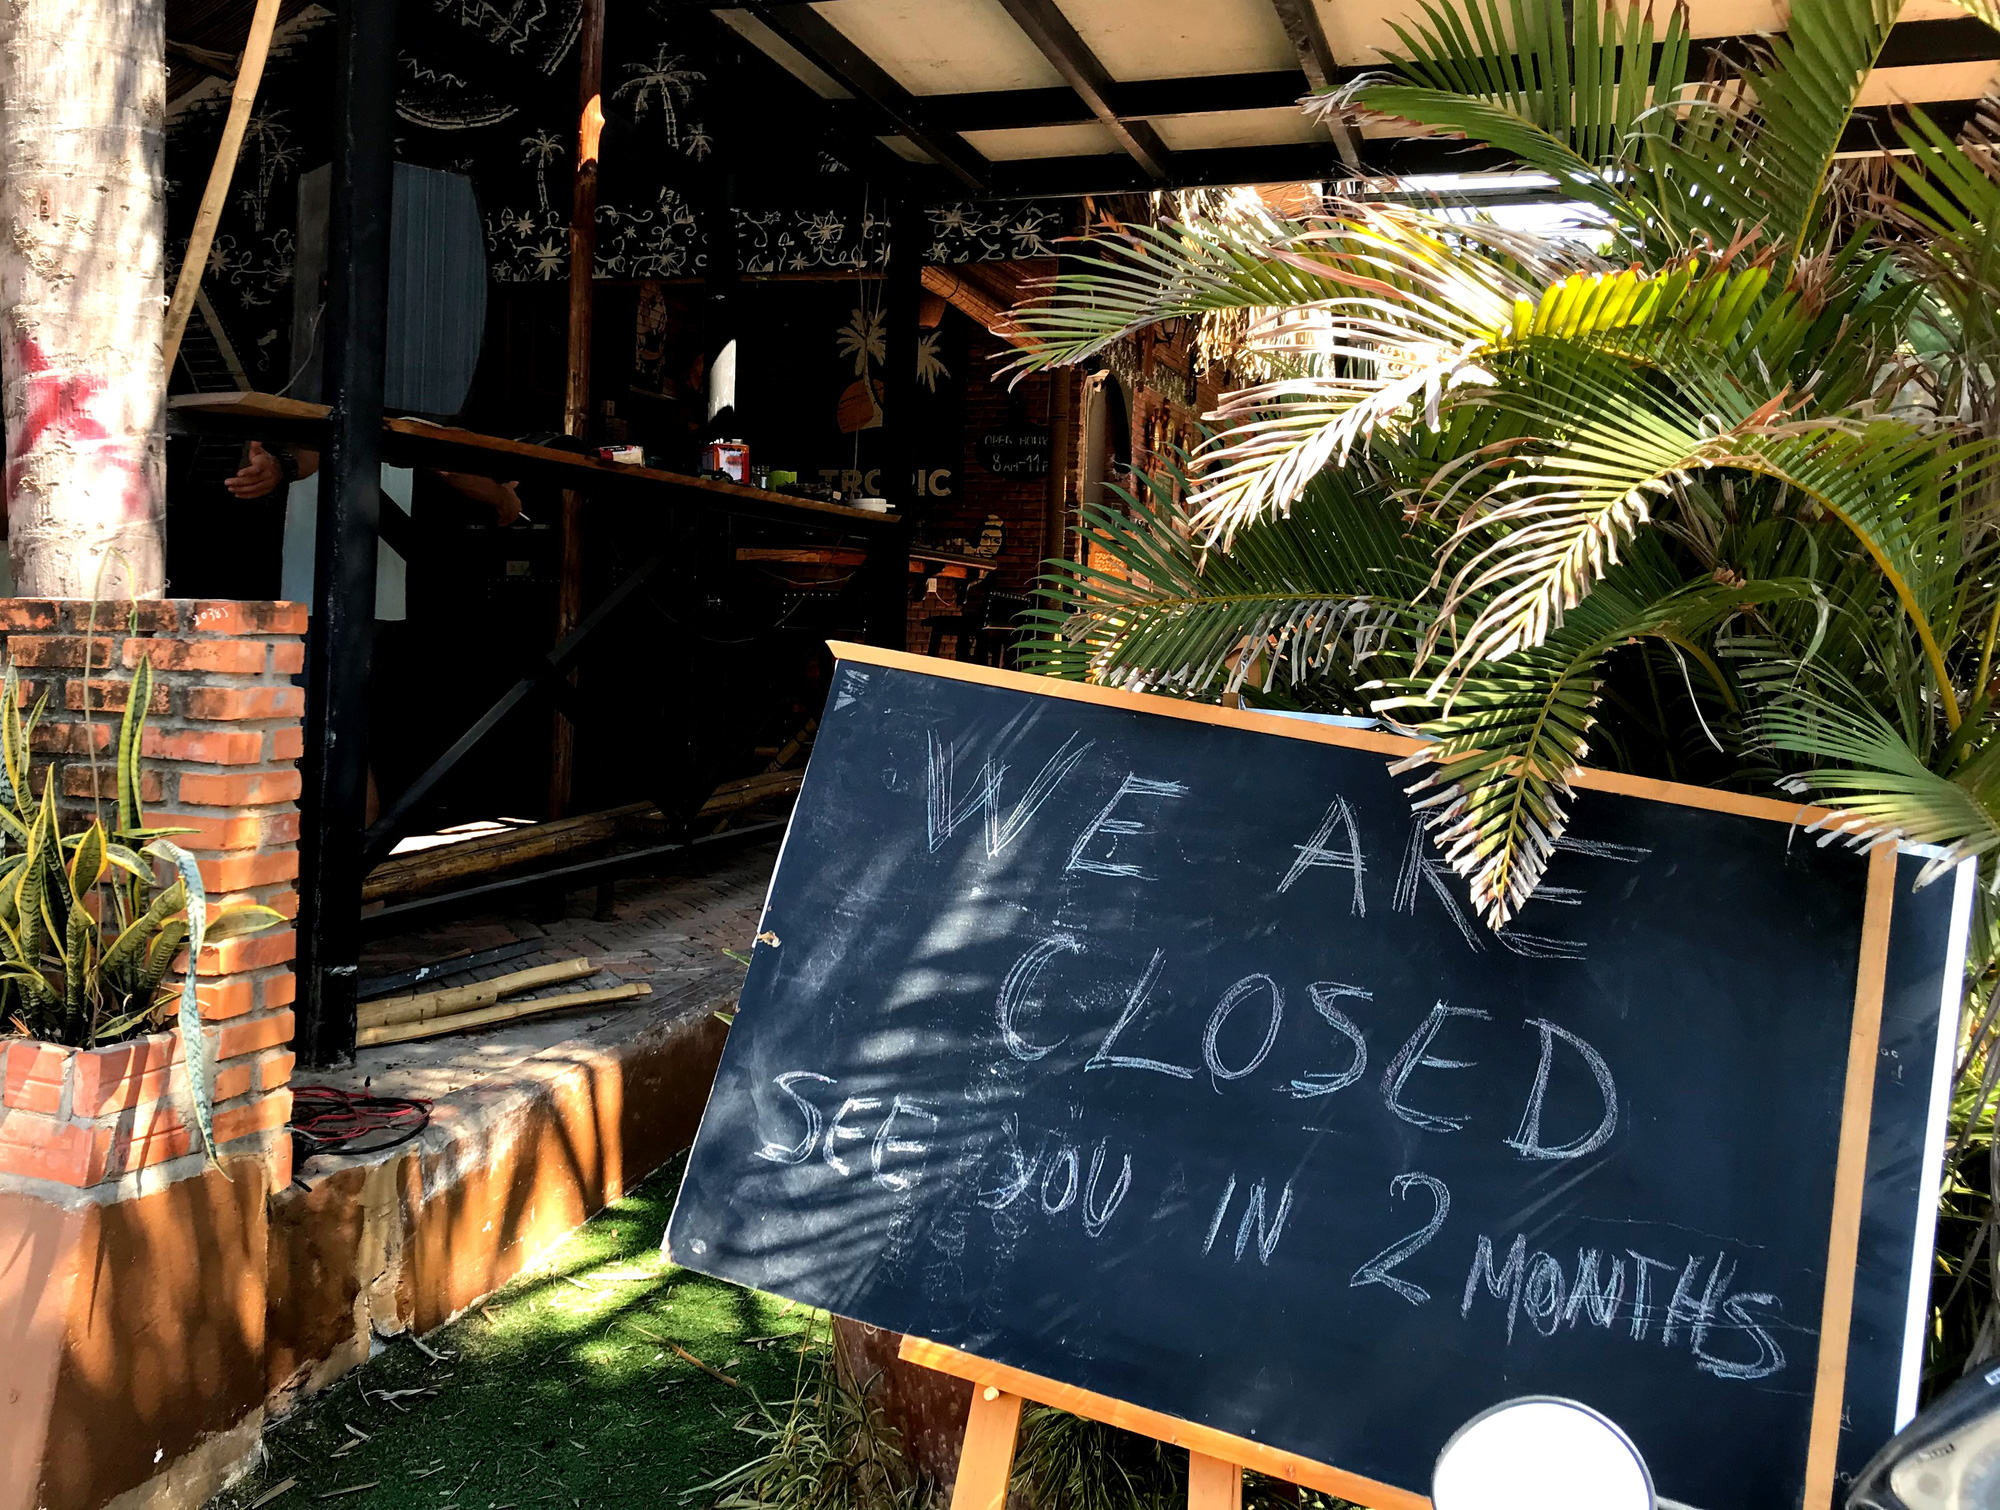 A closure sign in English is seen outside a bar-cafe in Mui Ne, Binh Thuan Province, Vietnam, March 15, 2020. Photo: Son Lam / Tuoi Tre